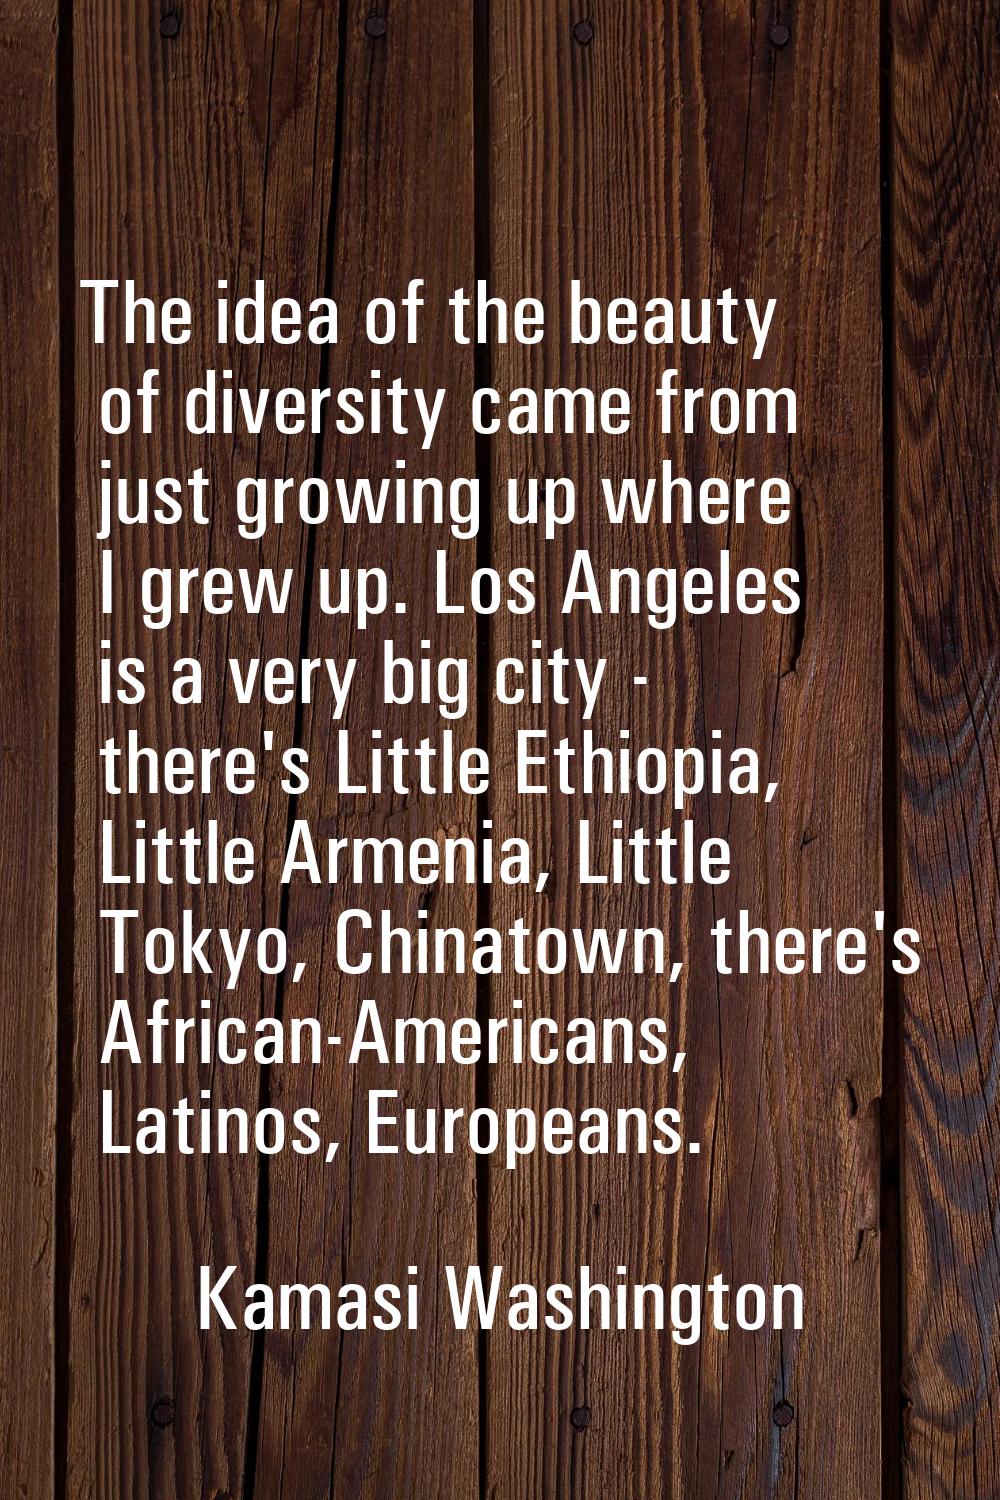 The idea of the beauty of diversity came from just growing up where I grew up. Los Angeles is a ver